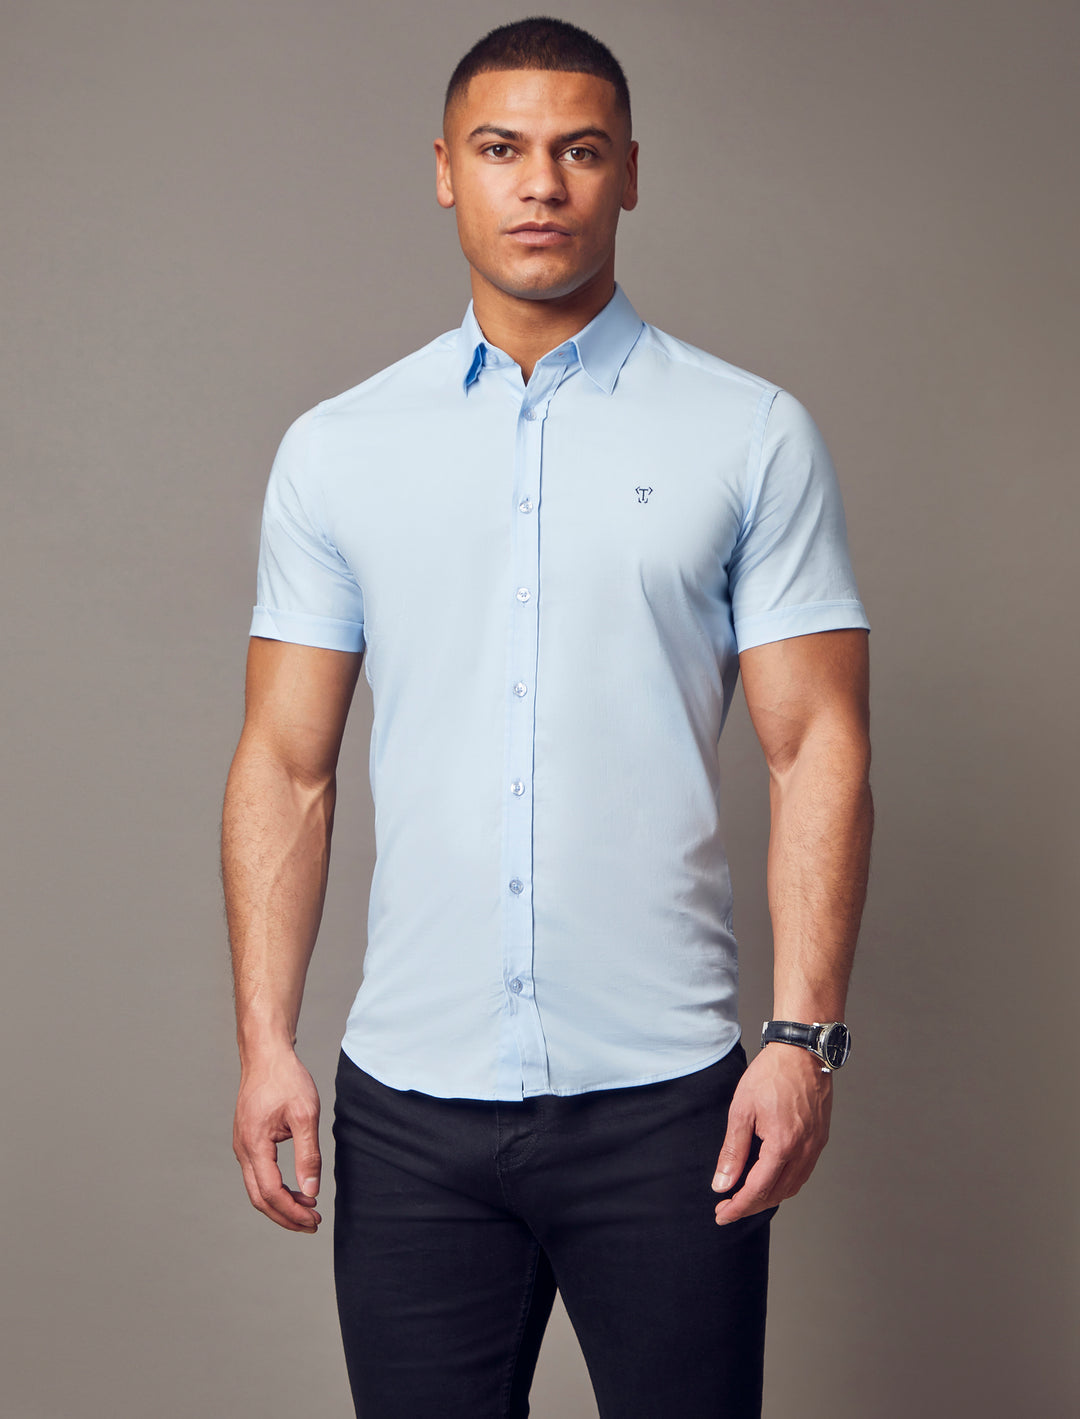 blue muscle fit short sleeve shirt, highlighting the tapered fit and superior quality offered by Tapered Menswear for athletic men